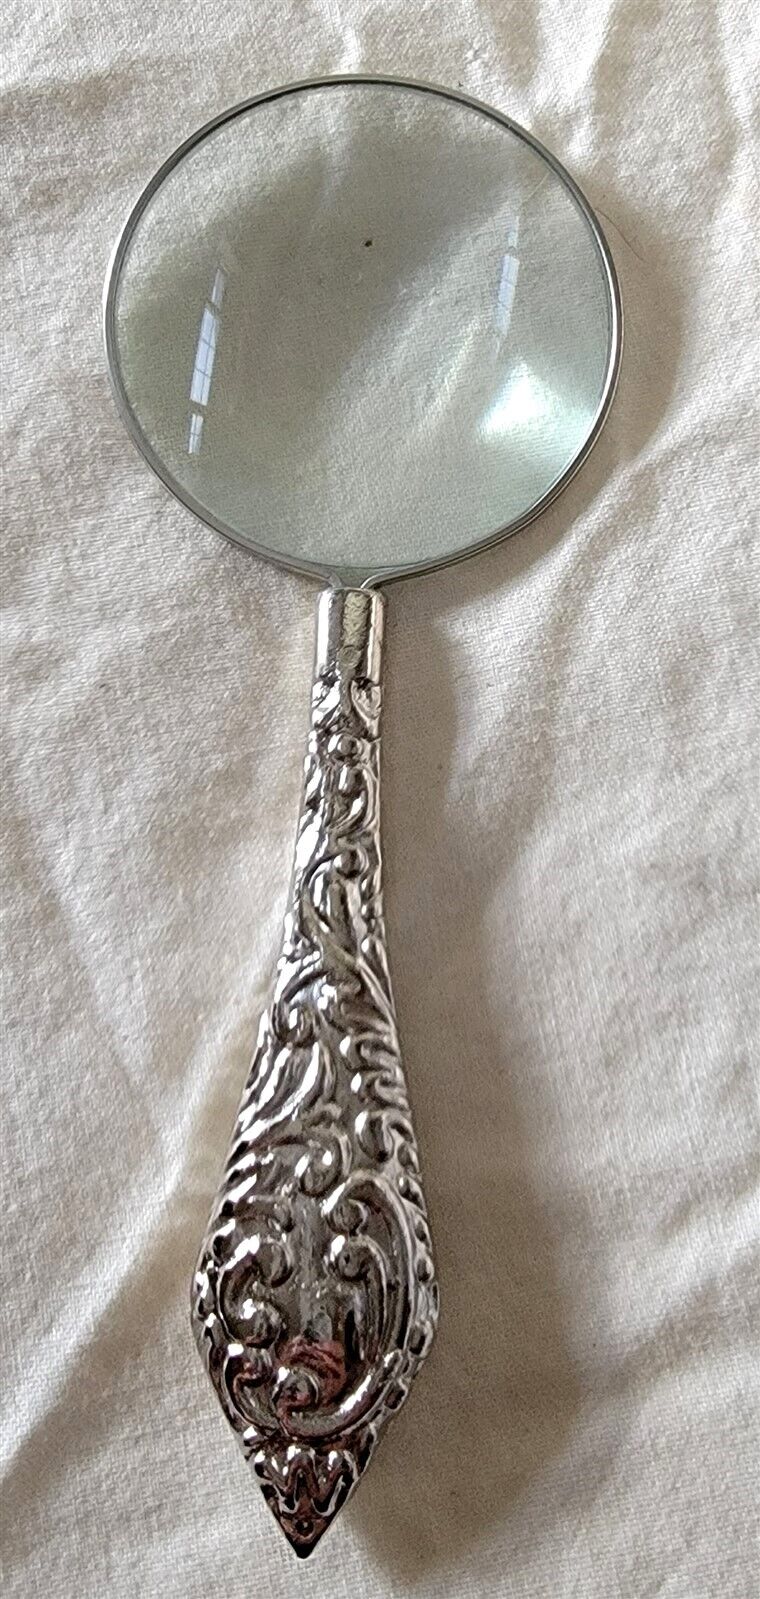 Victorian Trading Small Silver Magnifying Glass Desk Accessory 6C